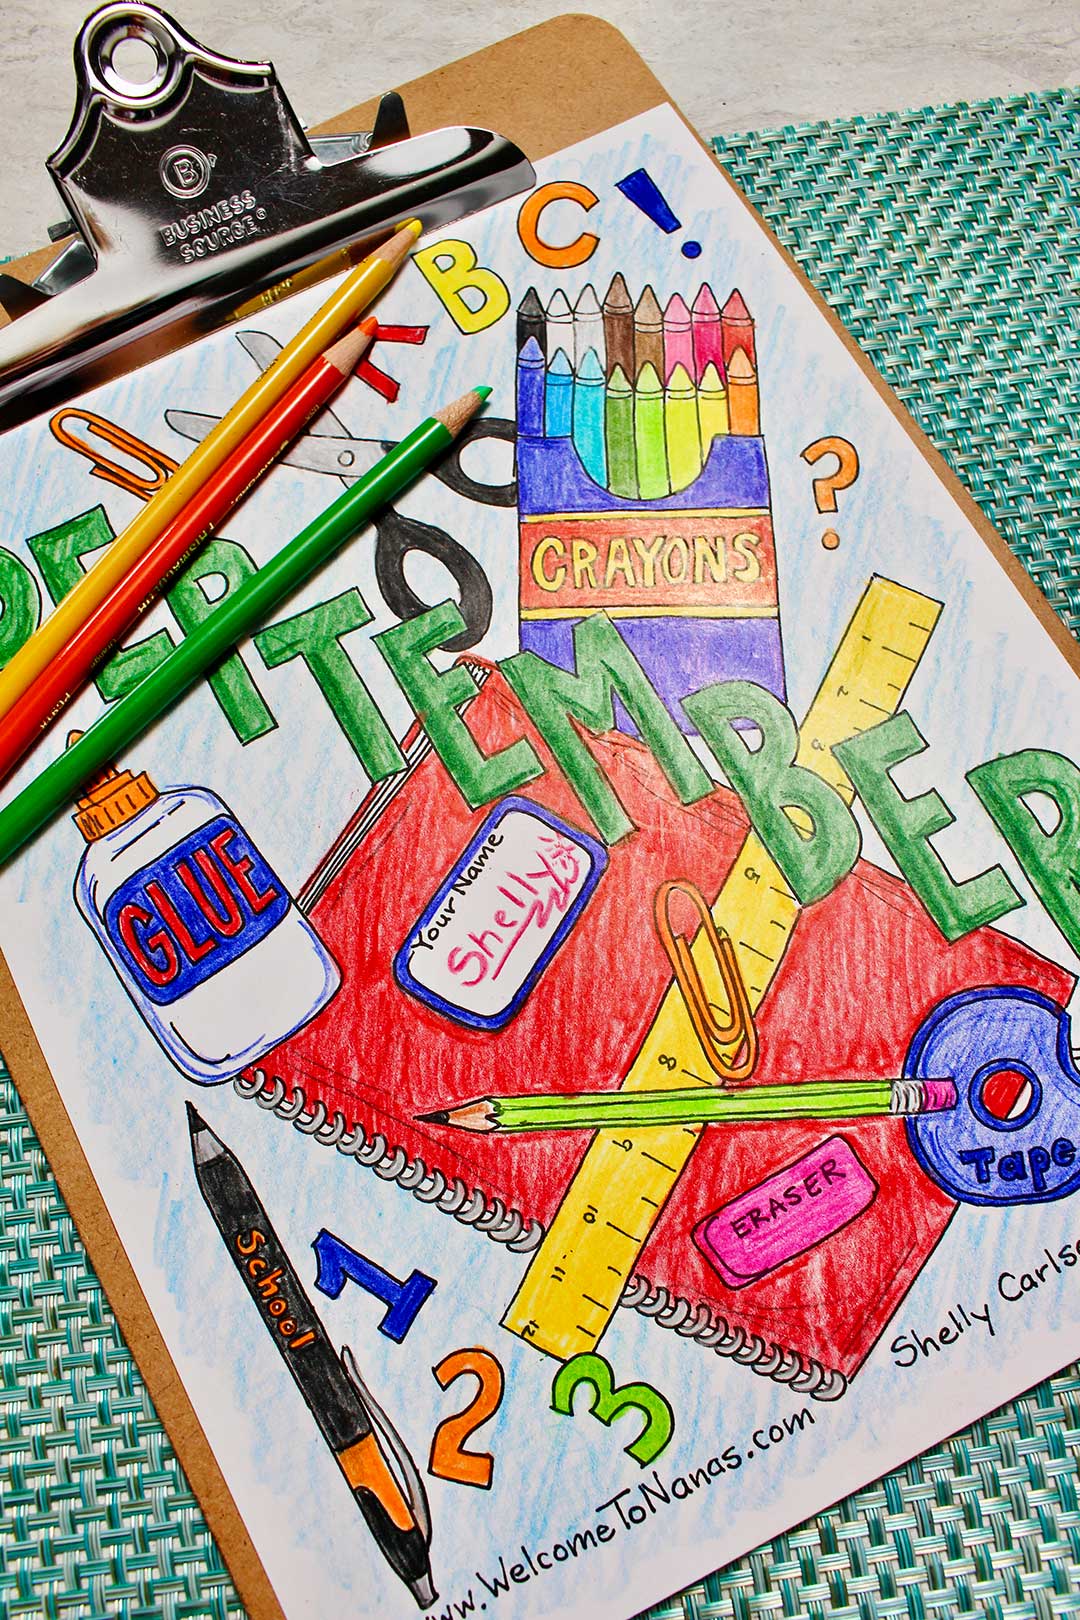 A completed September coloring sheet, decorated with school supplies, clipped into a clip board with colored pencils resting on it.